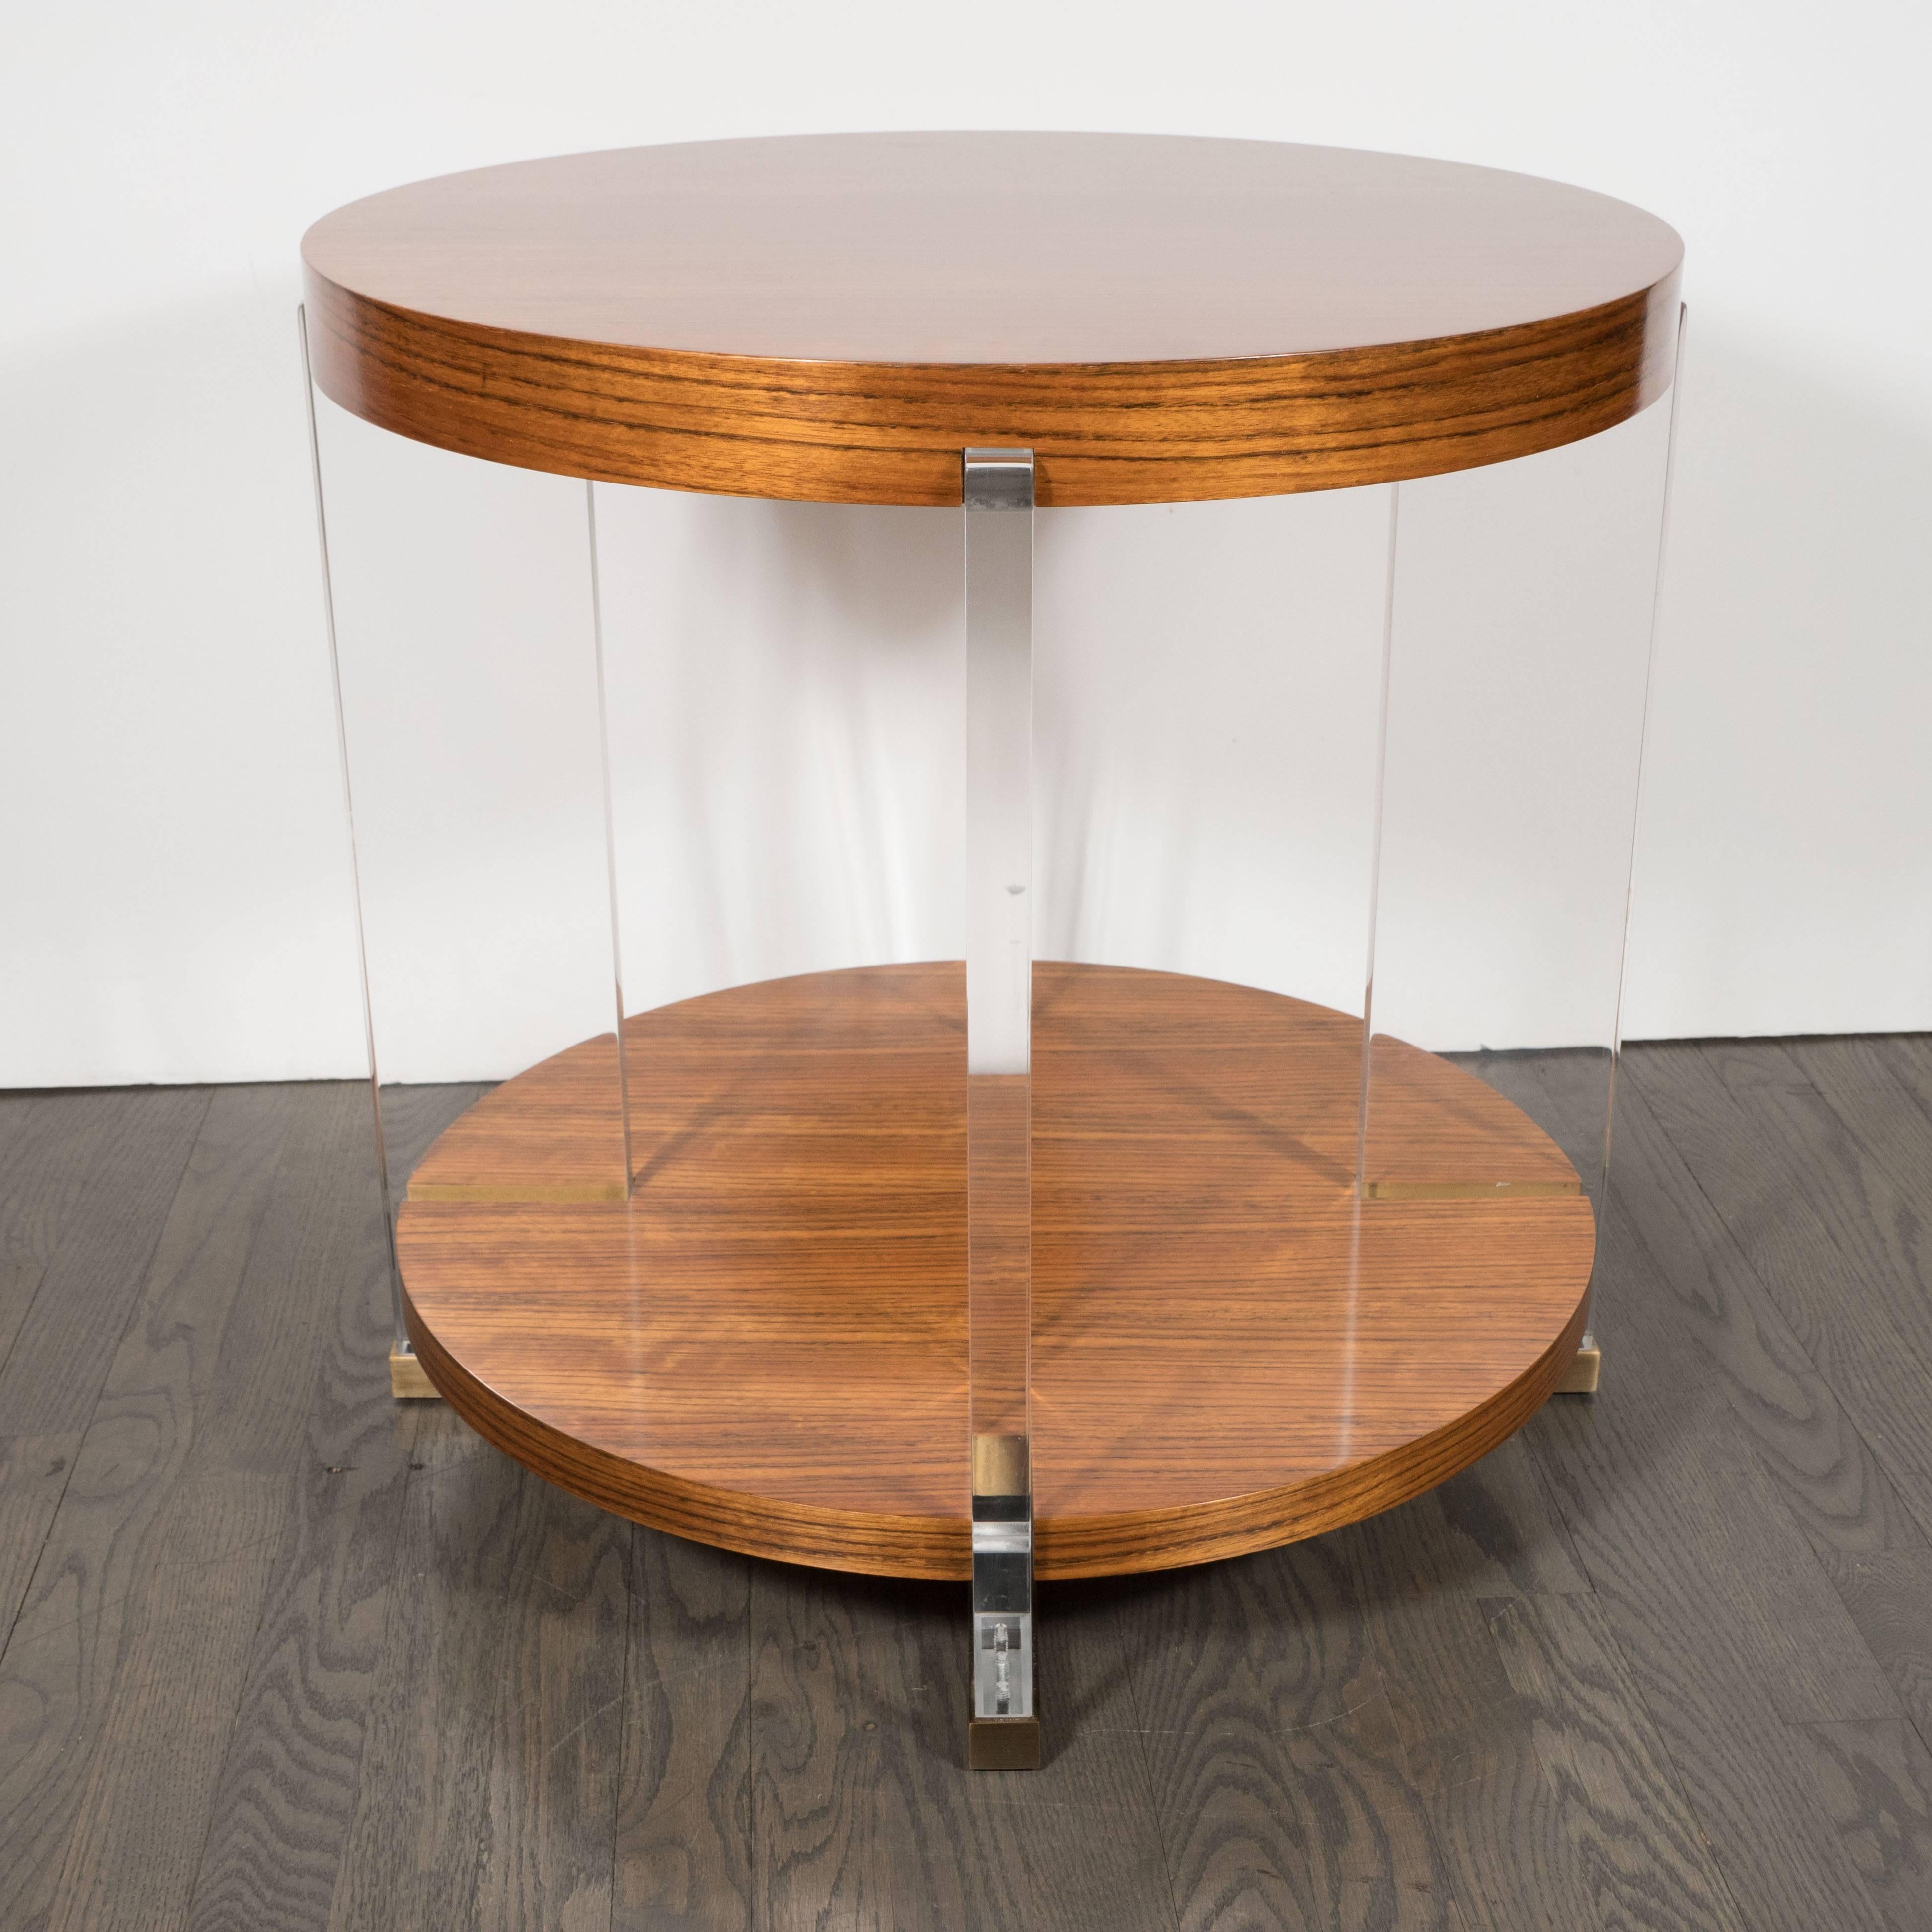 This chic tables feature translucent Lucite supports, brushed brass feet, and two tiers of book-matched Mozambique, whose high-key contrasting grain appears like tiger's eye gemstones. With its austere geometric forms and luxe exotic wood juxtaposed